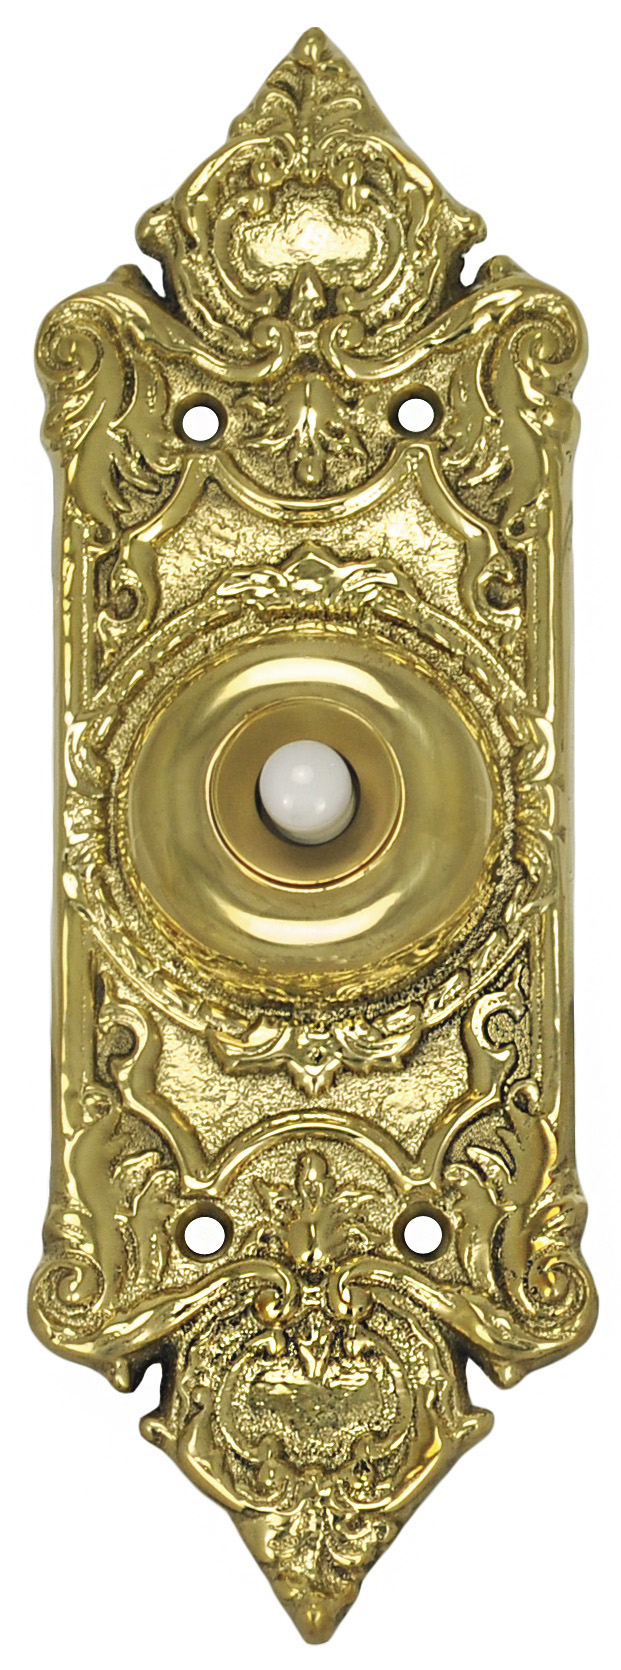 Victorian Decorative Doorbell Button in Polished Brass | House of Antique  Hardware